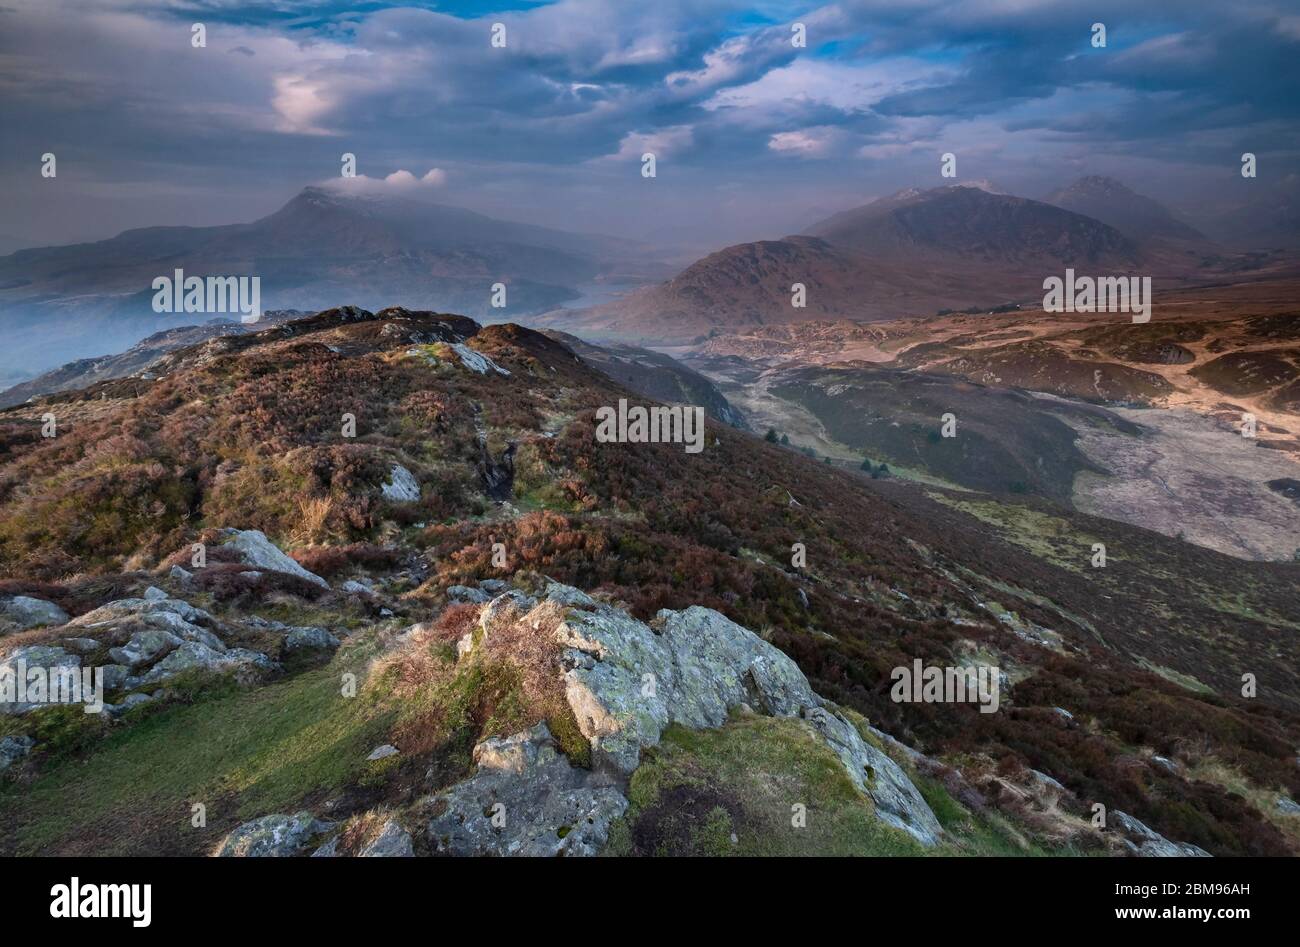 Big Skies over Crimpiau, looking to Dyffryn Mymbyr and Moel Siabod and The Glyderau, Snowdonia National Park, North Wales, UK Stock Photo